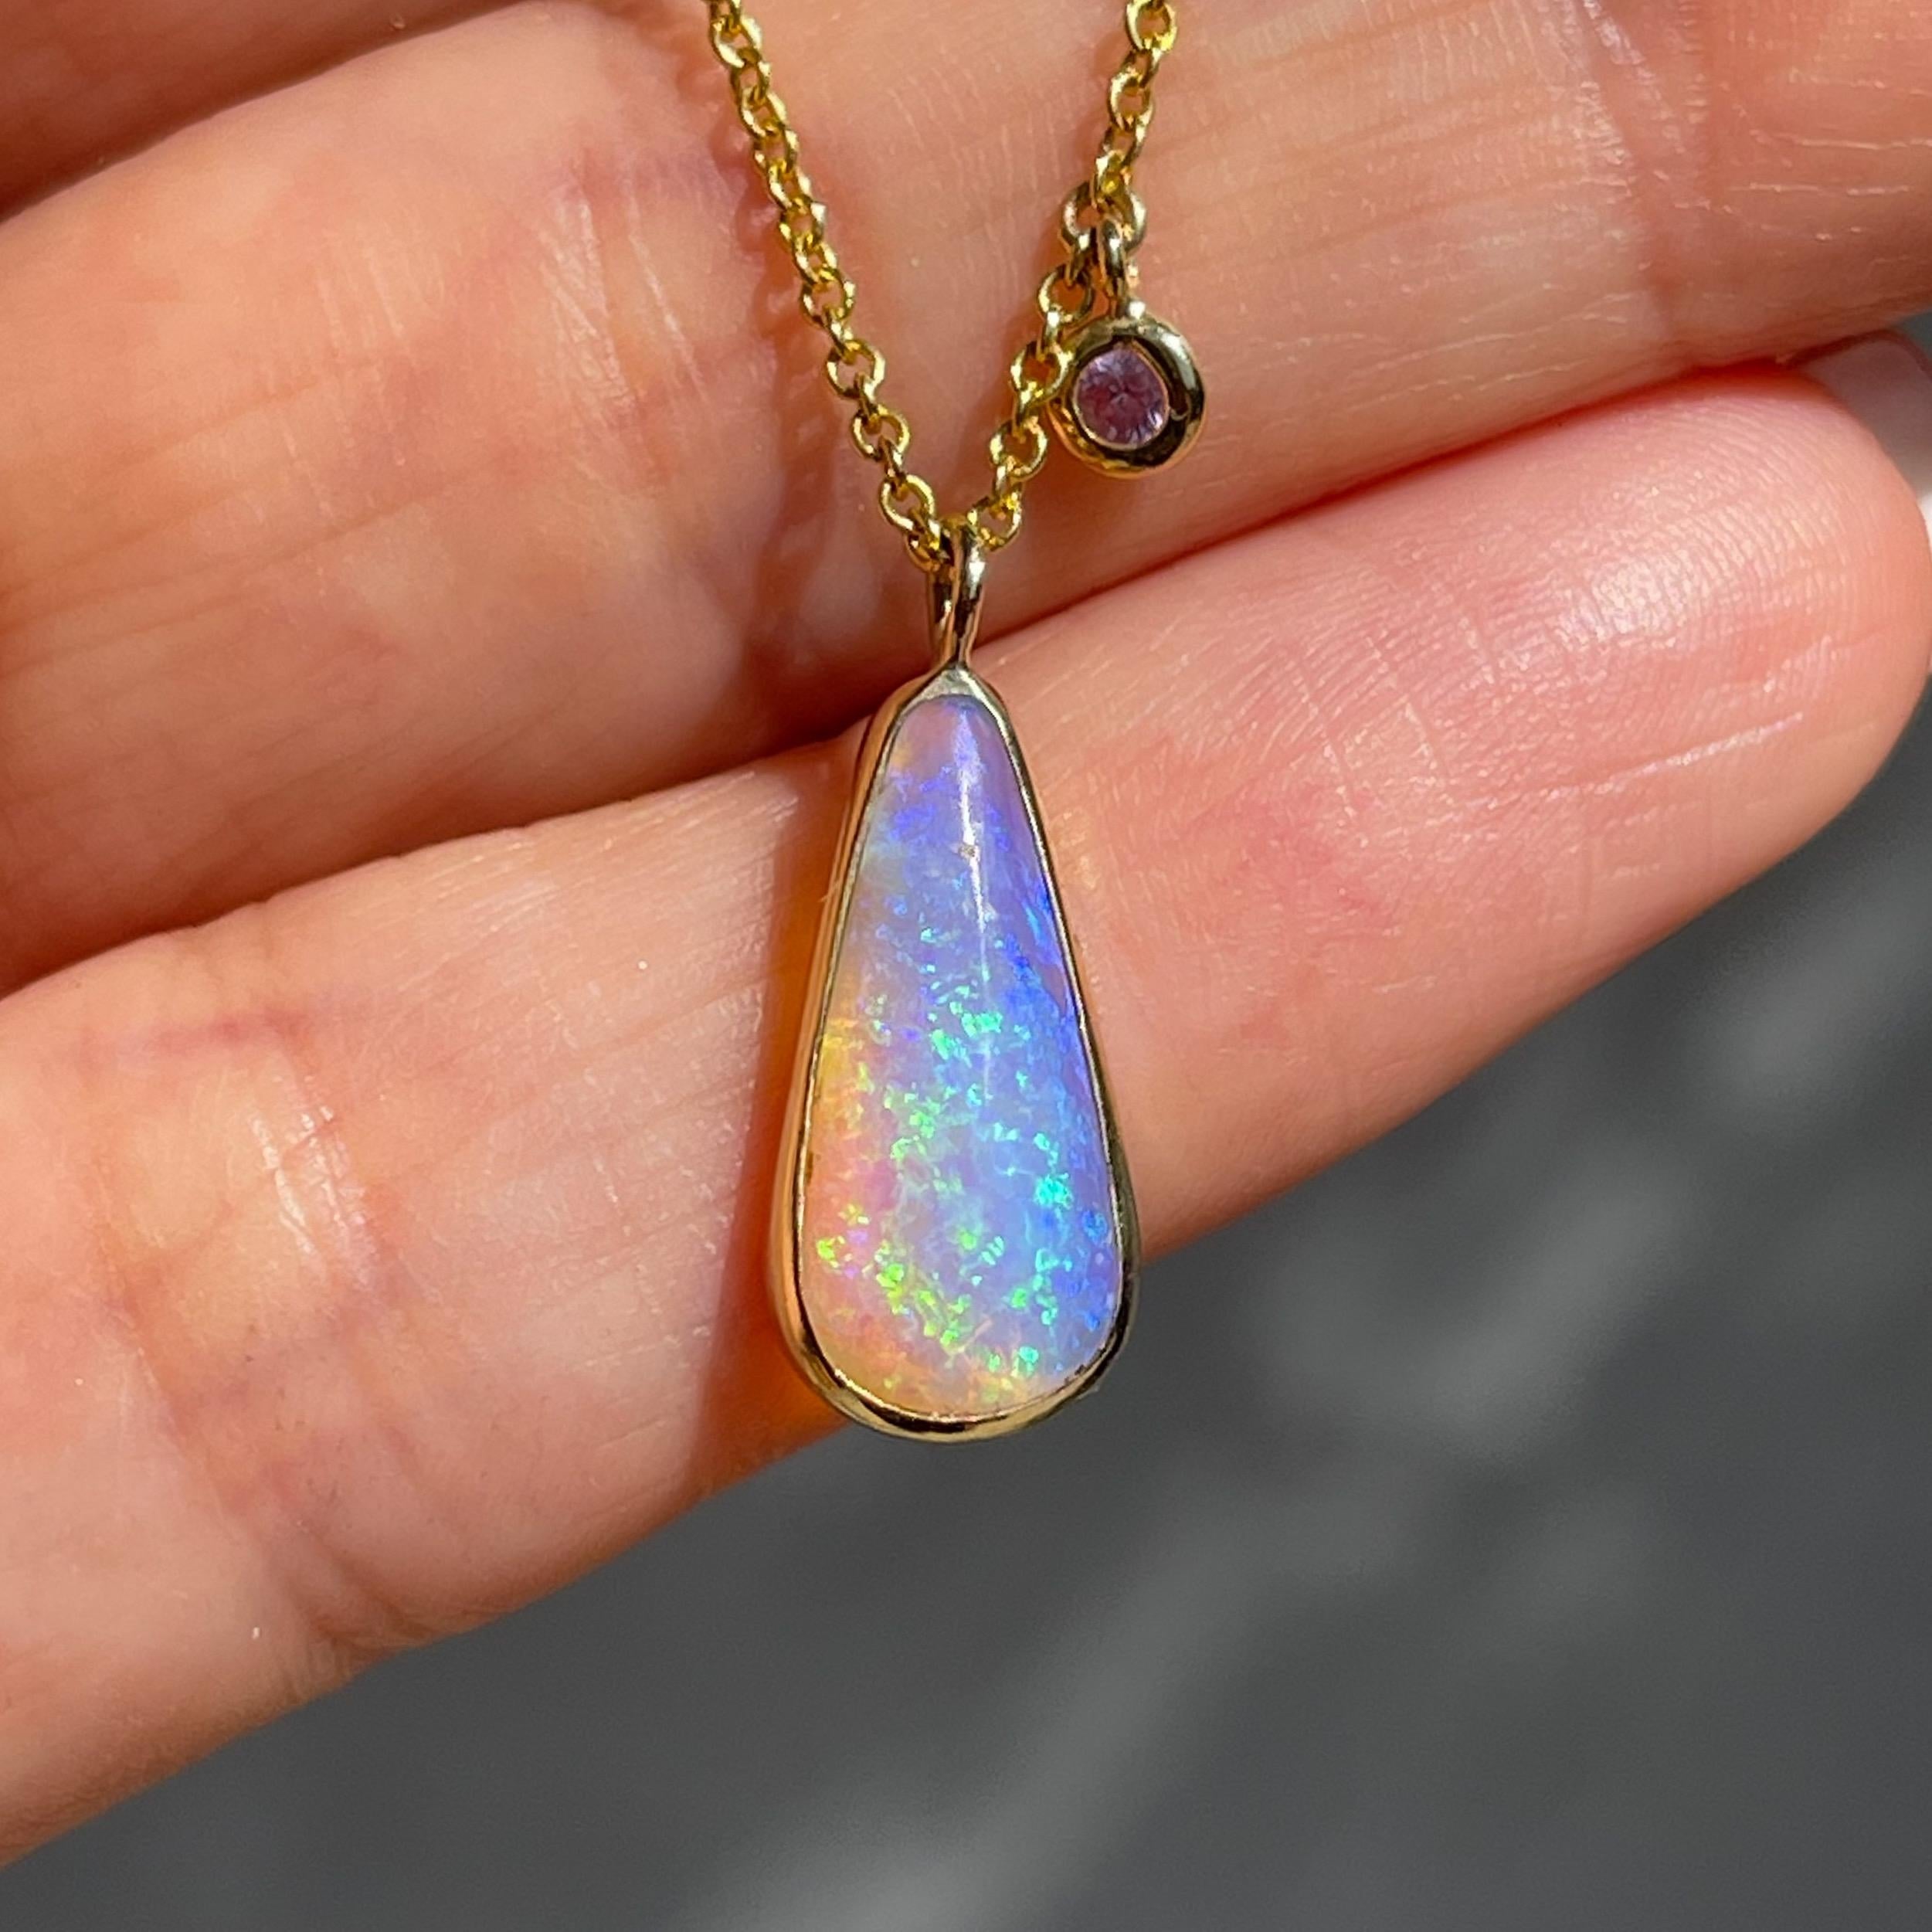 A shimmering pipe opal, aglow with possibility, beams in this Australian Opal Necklace. Three sapphire charms dangle above, and blend sapphire and opal as one. Their shared palette of purple and pink is soft and electric at once. As the rising sun